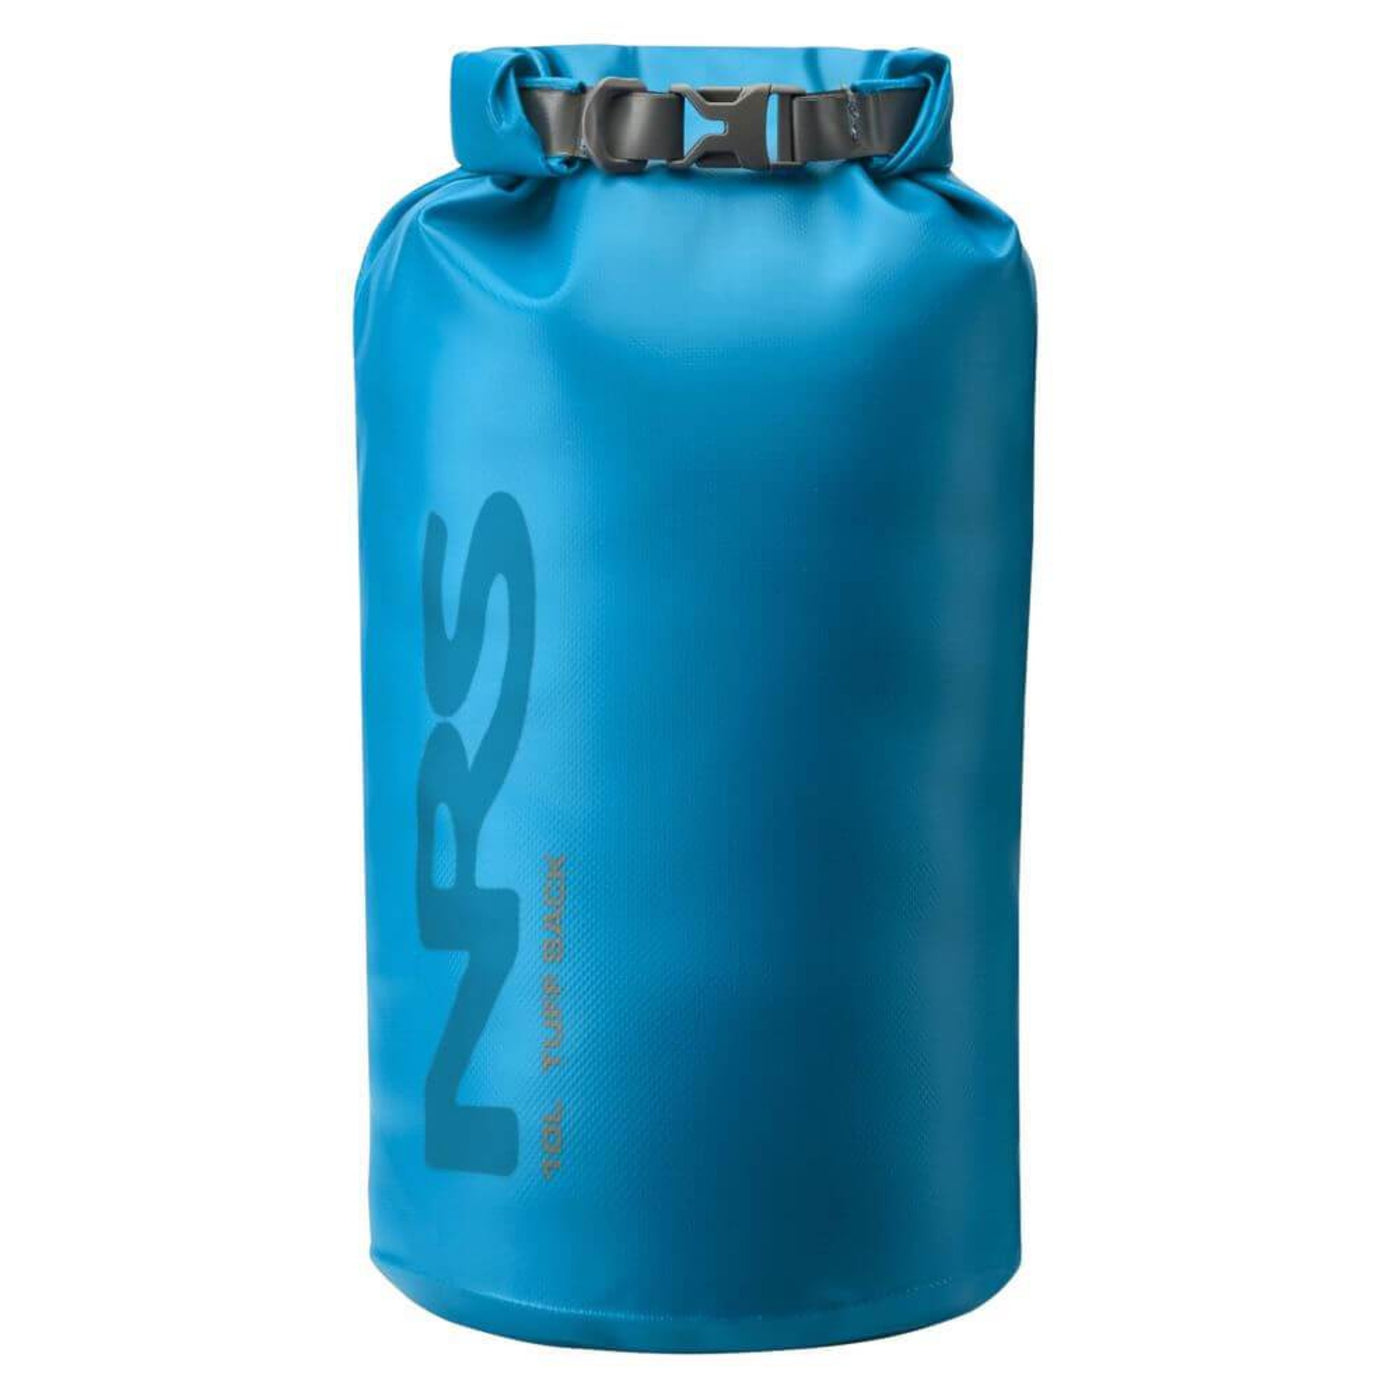 NRS Tuff Sack Dry Bag 15L | Kayak Dry Bags and Accessories | NRS NZ | Further Faster Christchurch NZ #blue